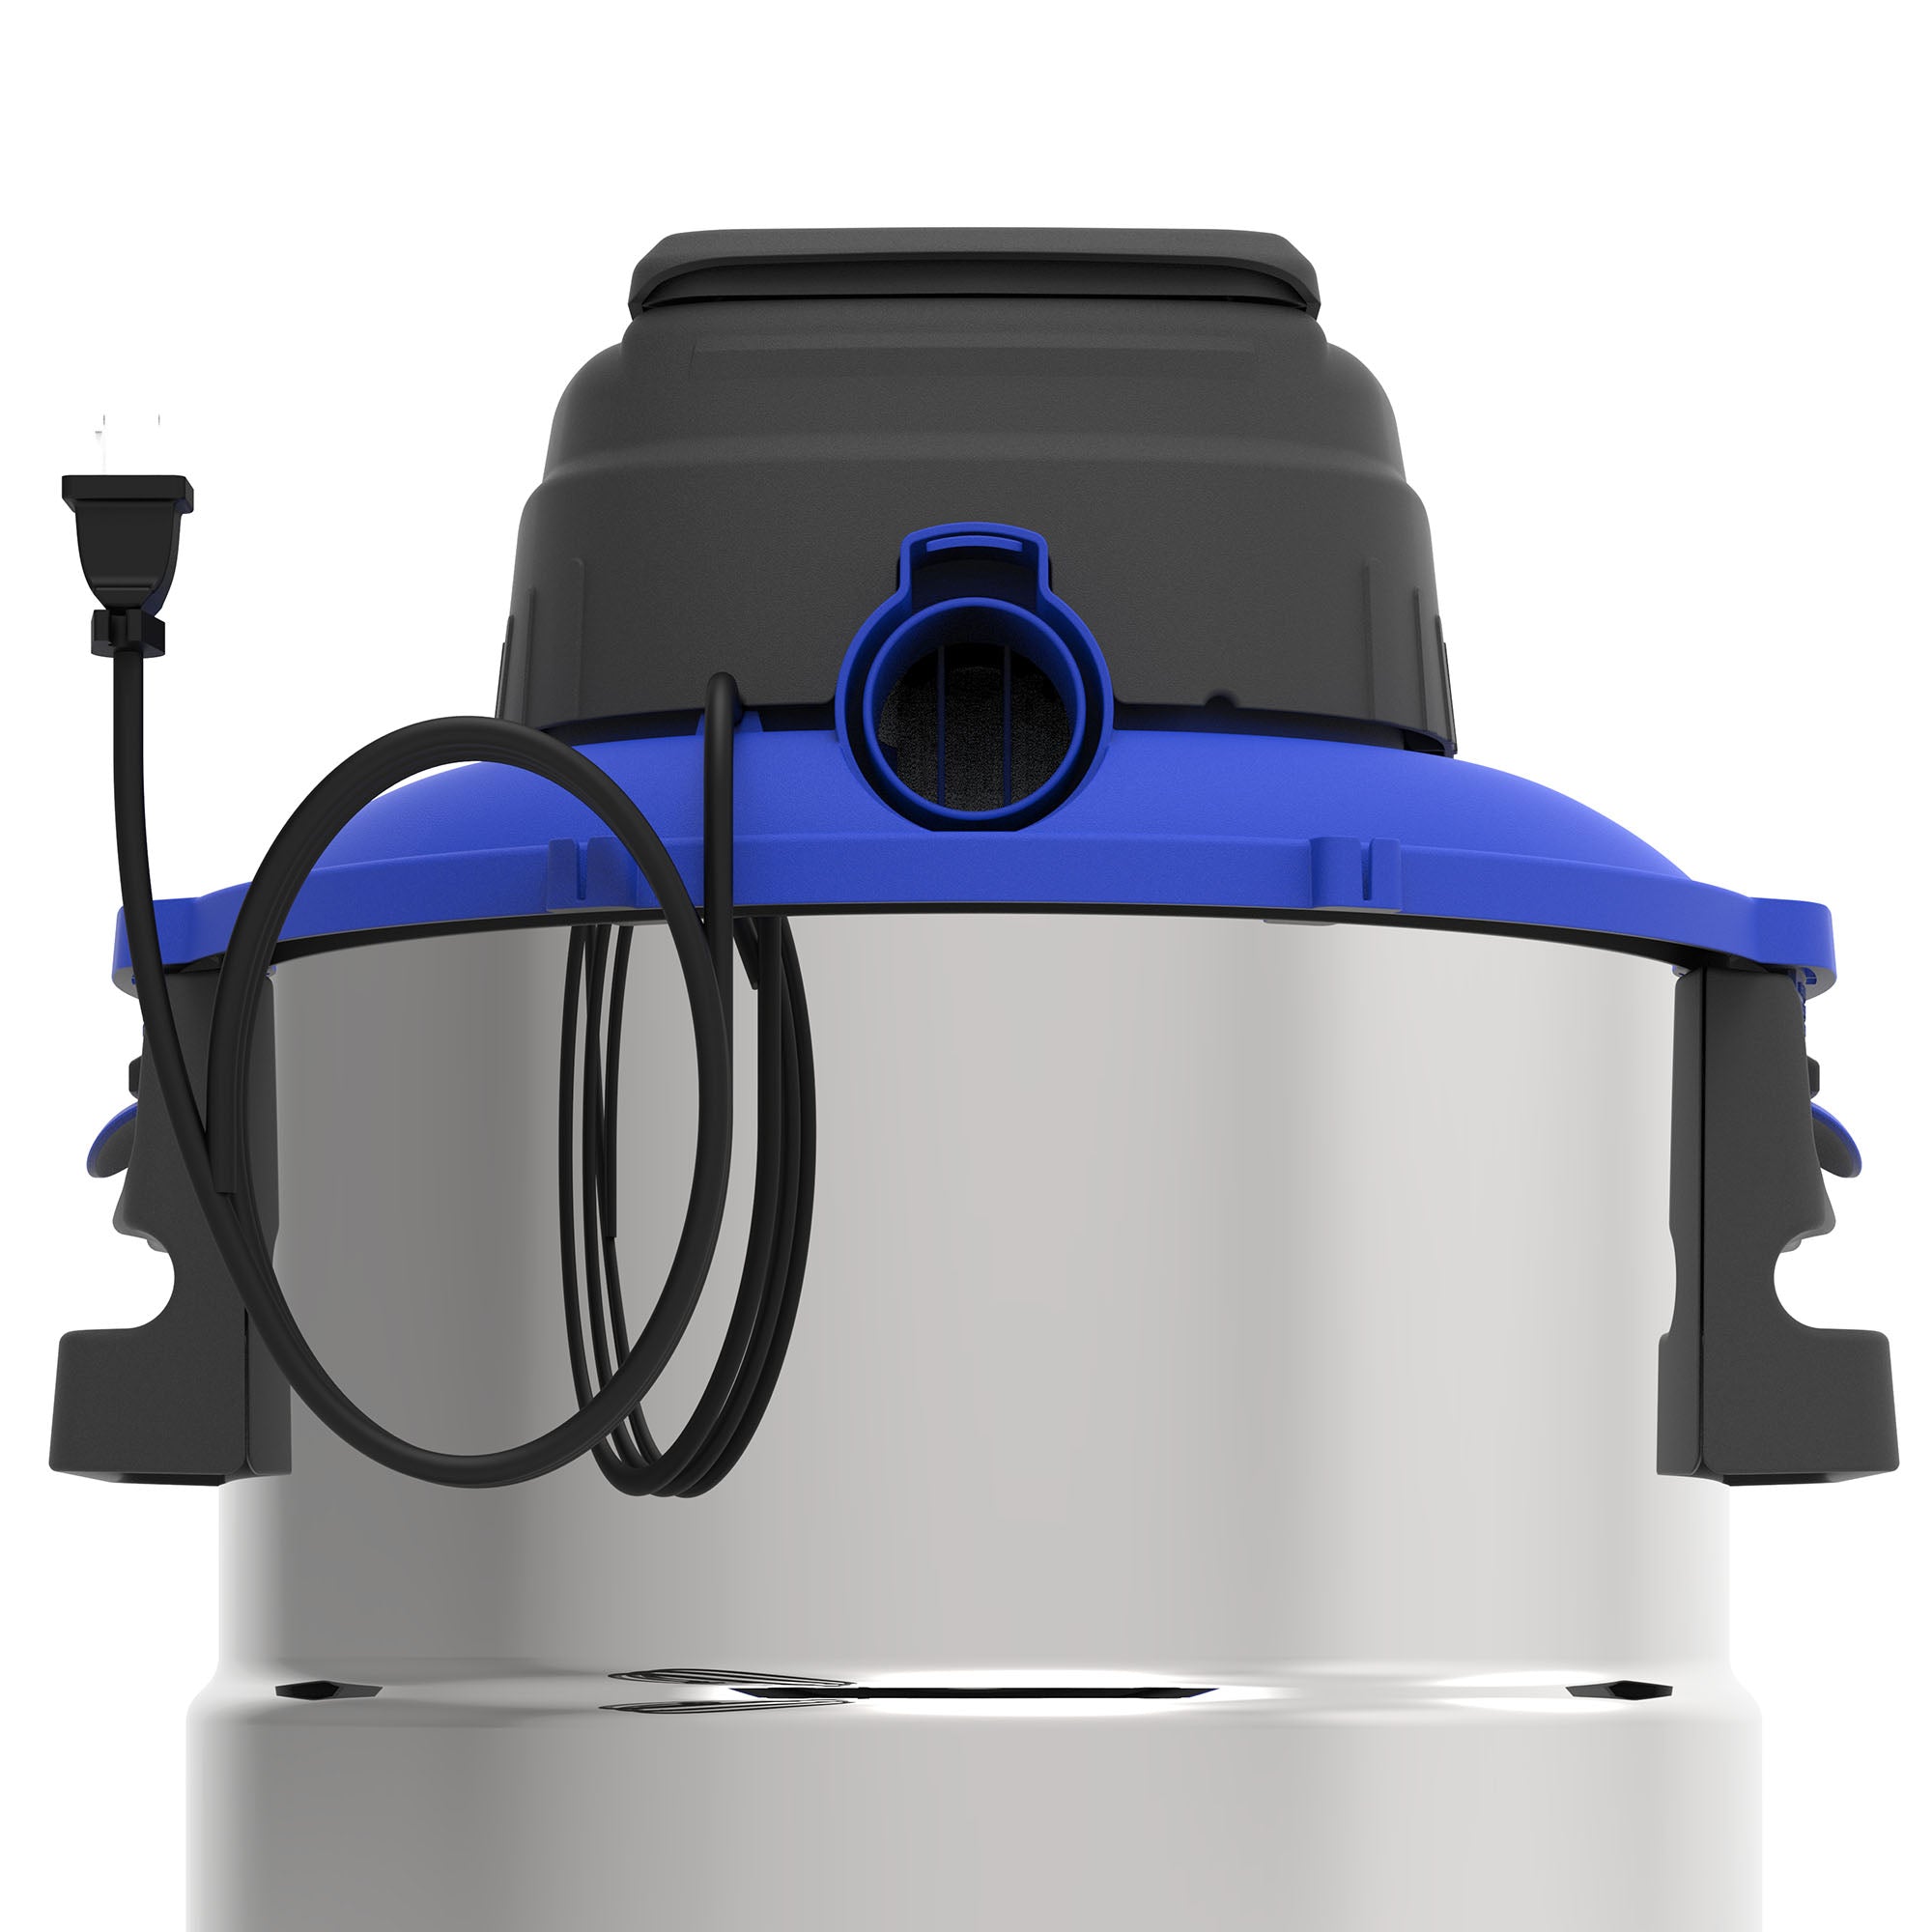 12 Gallon 6.0 PHP Stainless Steel Wet Dry Vacuum WD-12 L314 SS